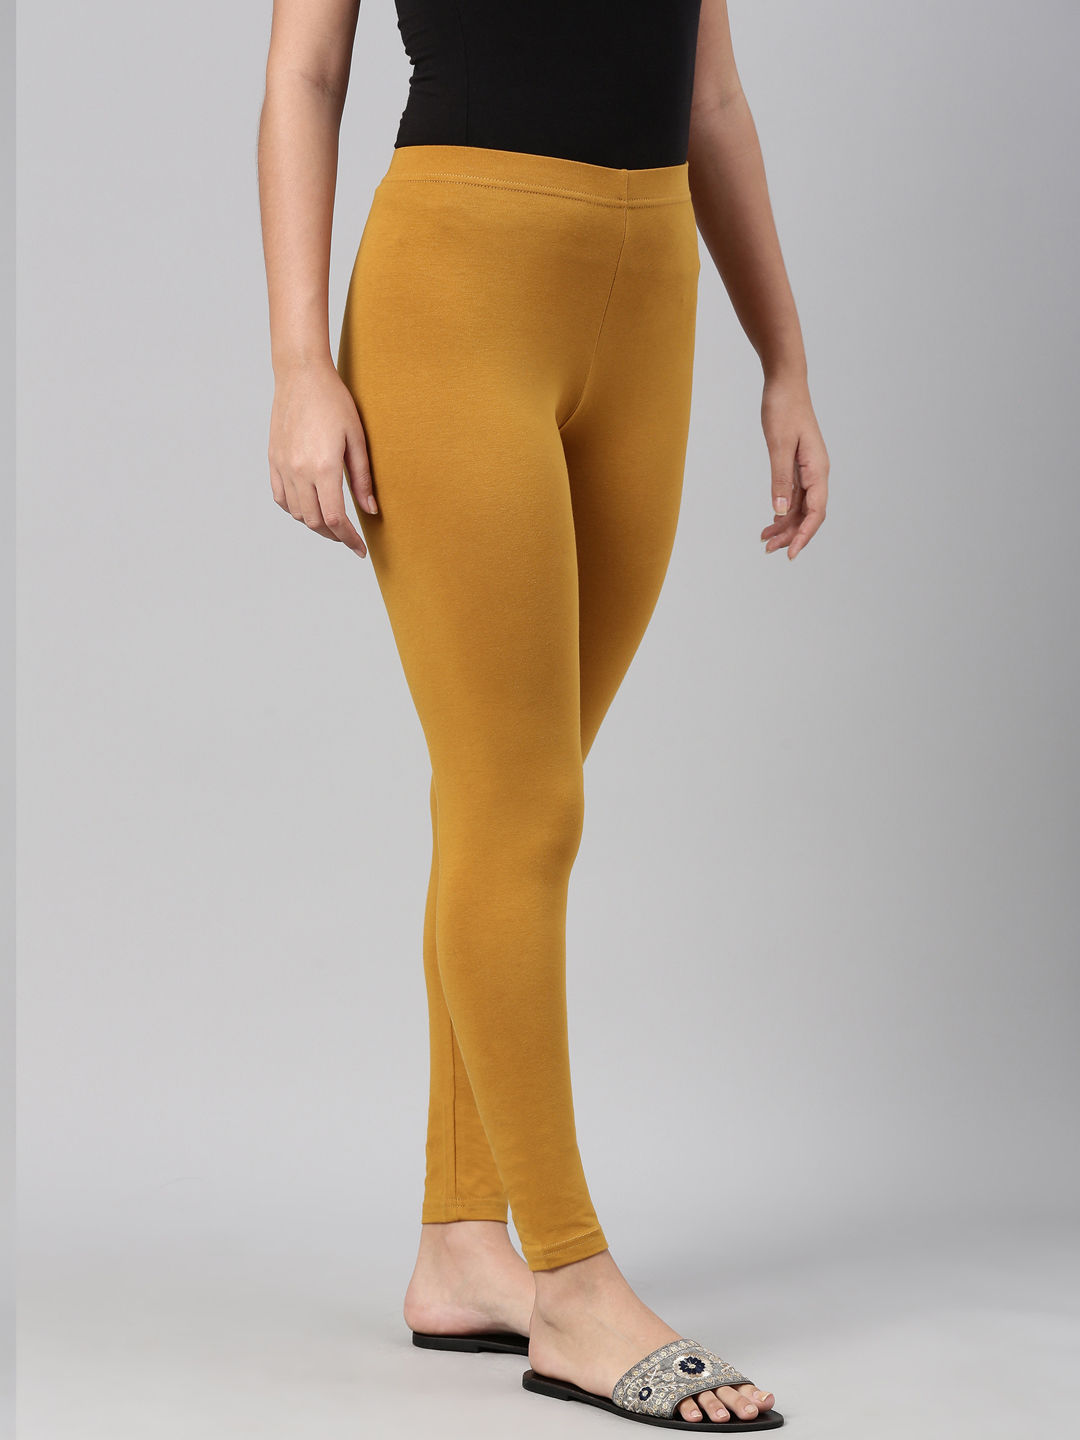 Yellow Footless Tights for Women Ankle Length Pantyhose Plus Size Available  - Etsy